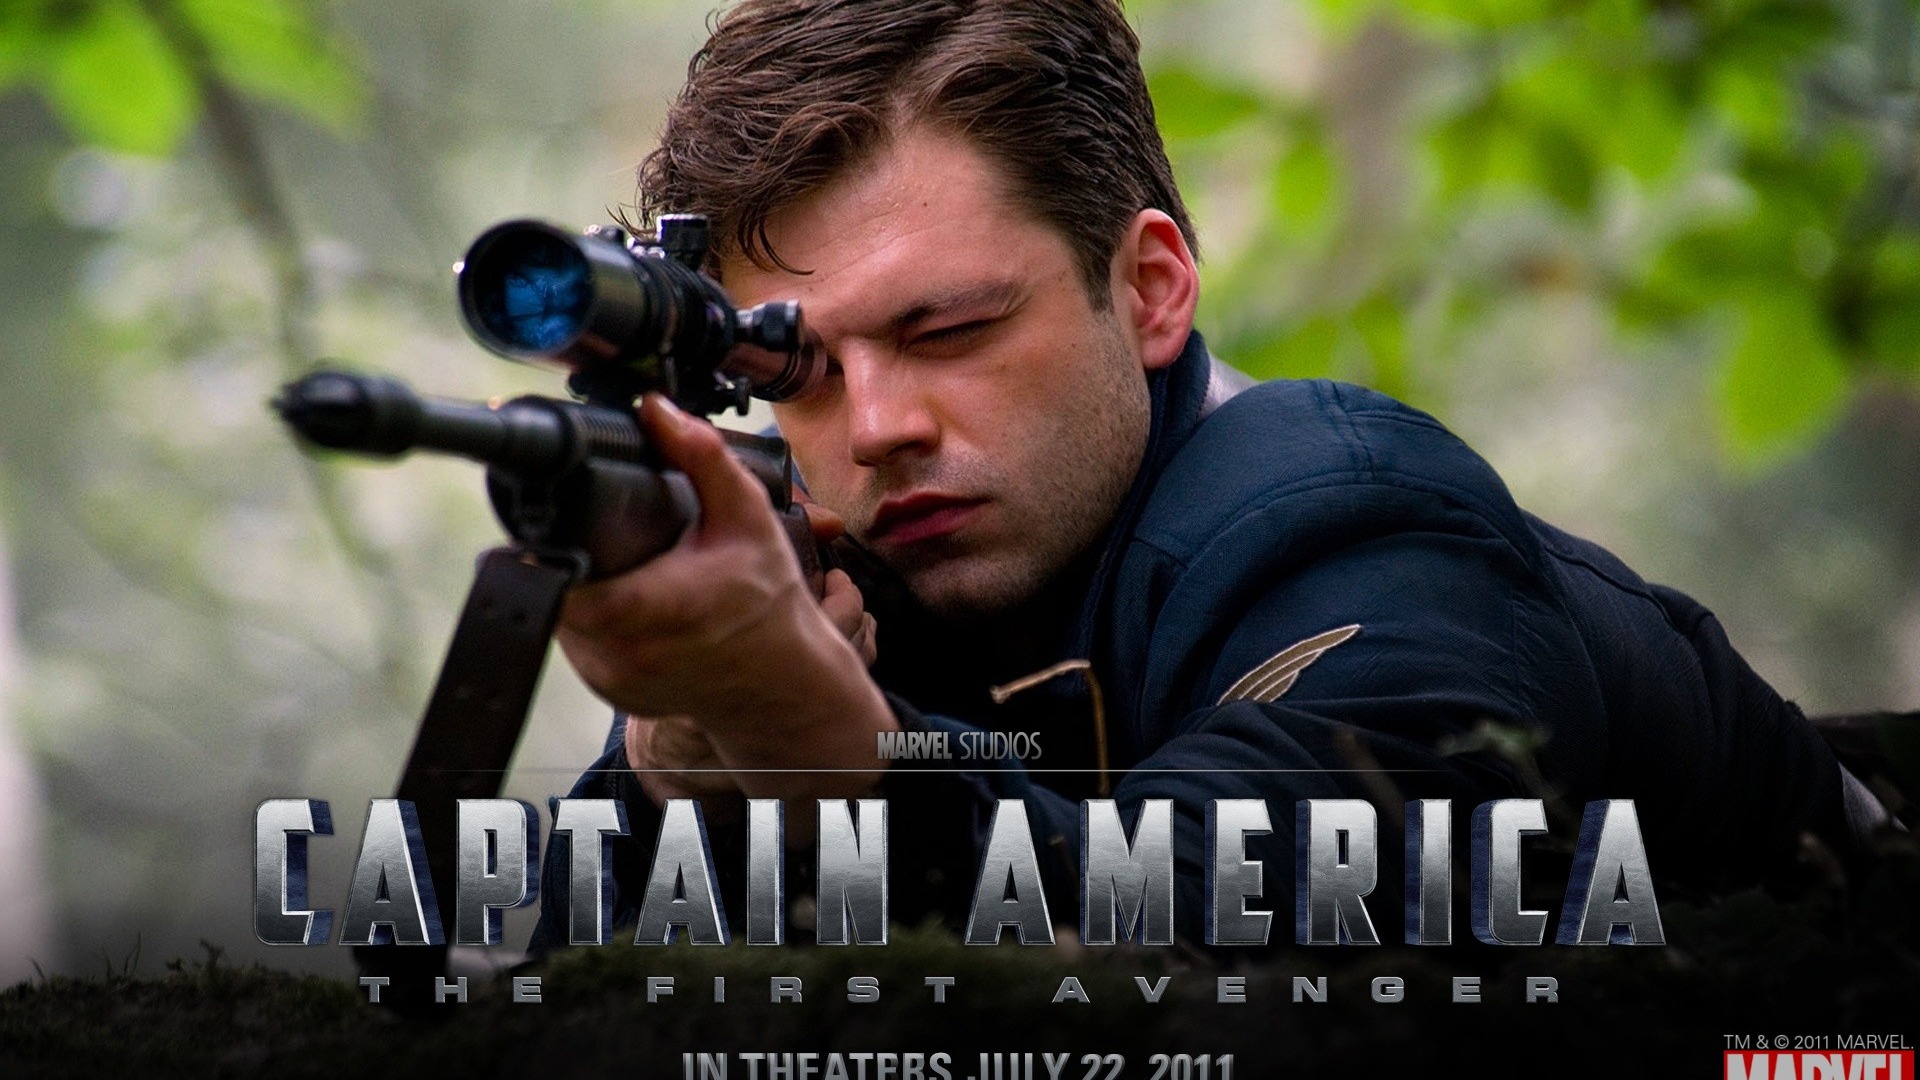 Captain America: The First Avenger wallpapers HD #18 - 1920x1080